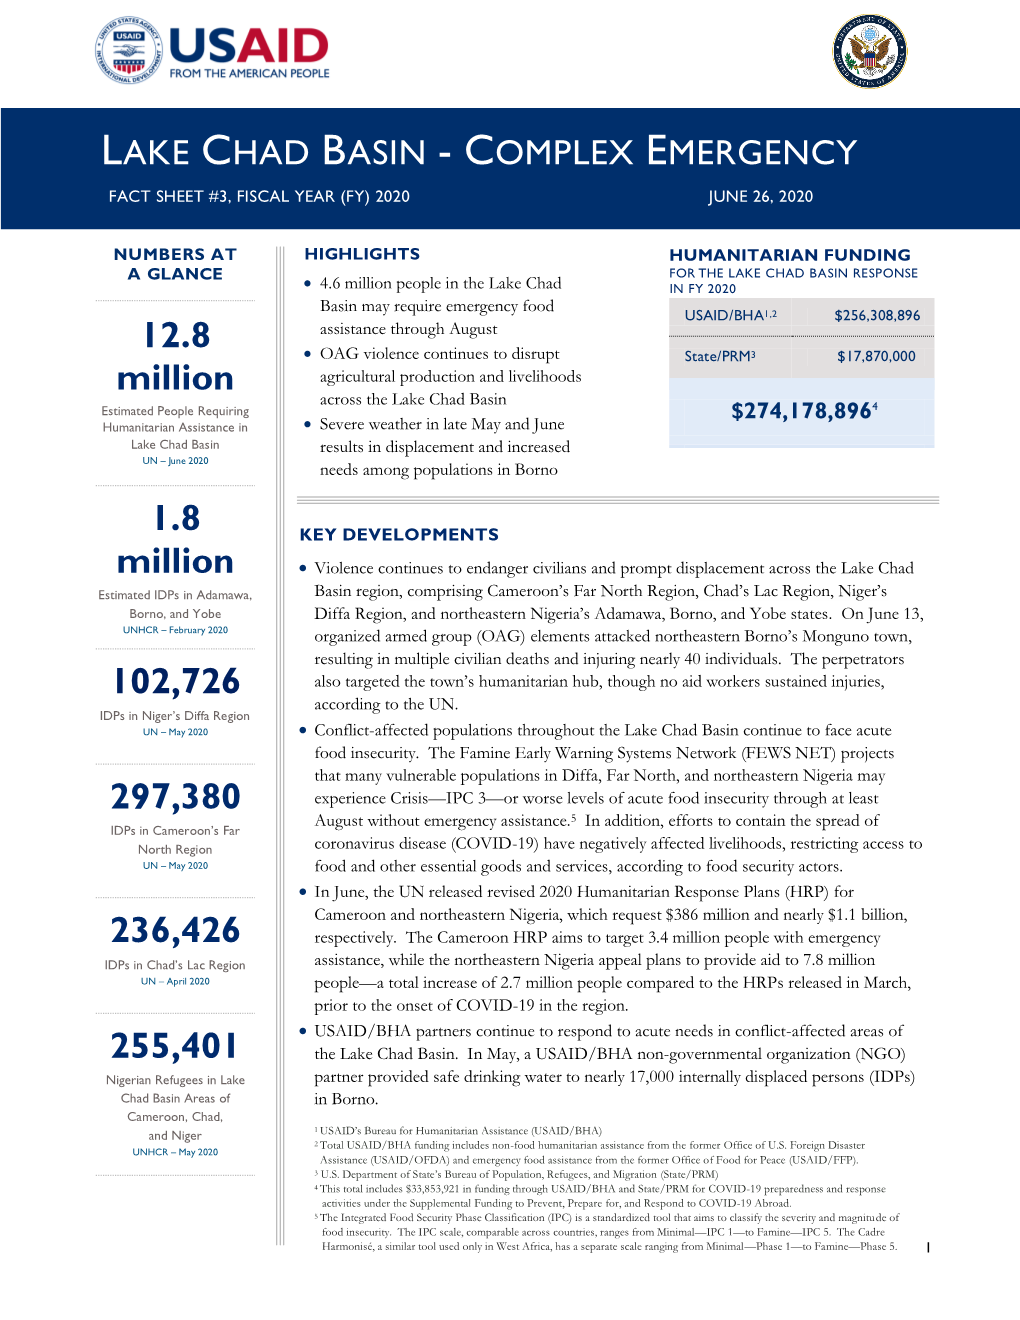 Lake Chad Basin - Complex Emergency Fact Sheet #3, Fiscal Year (Fy) 2020 June 26, 2020